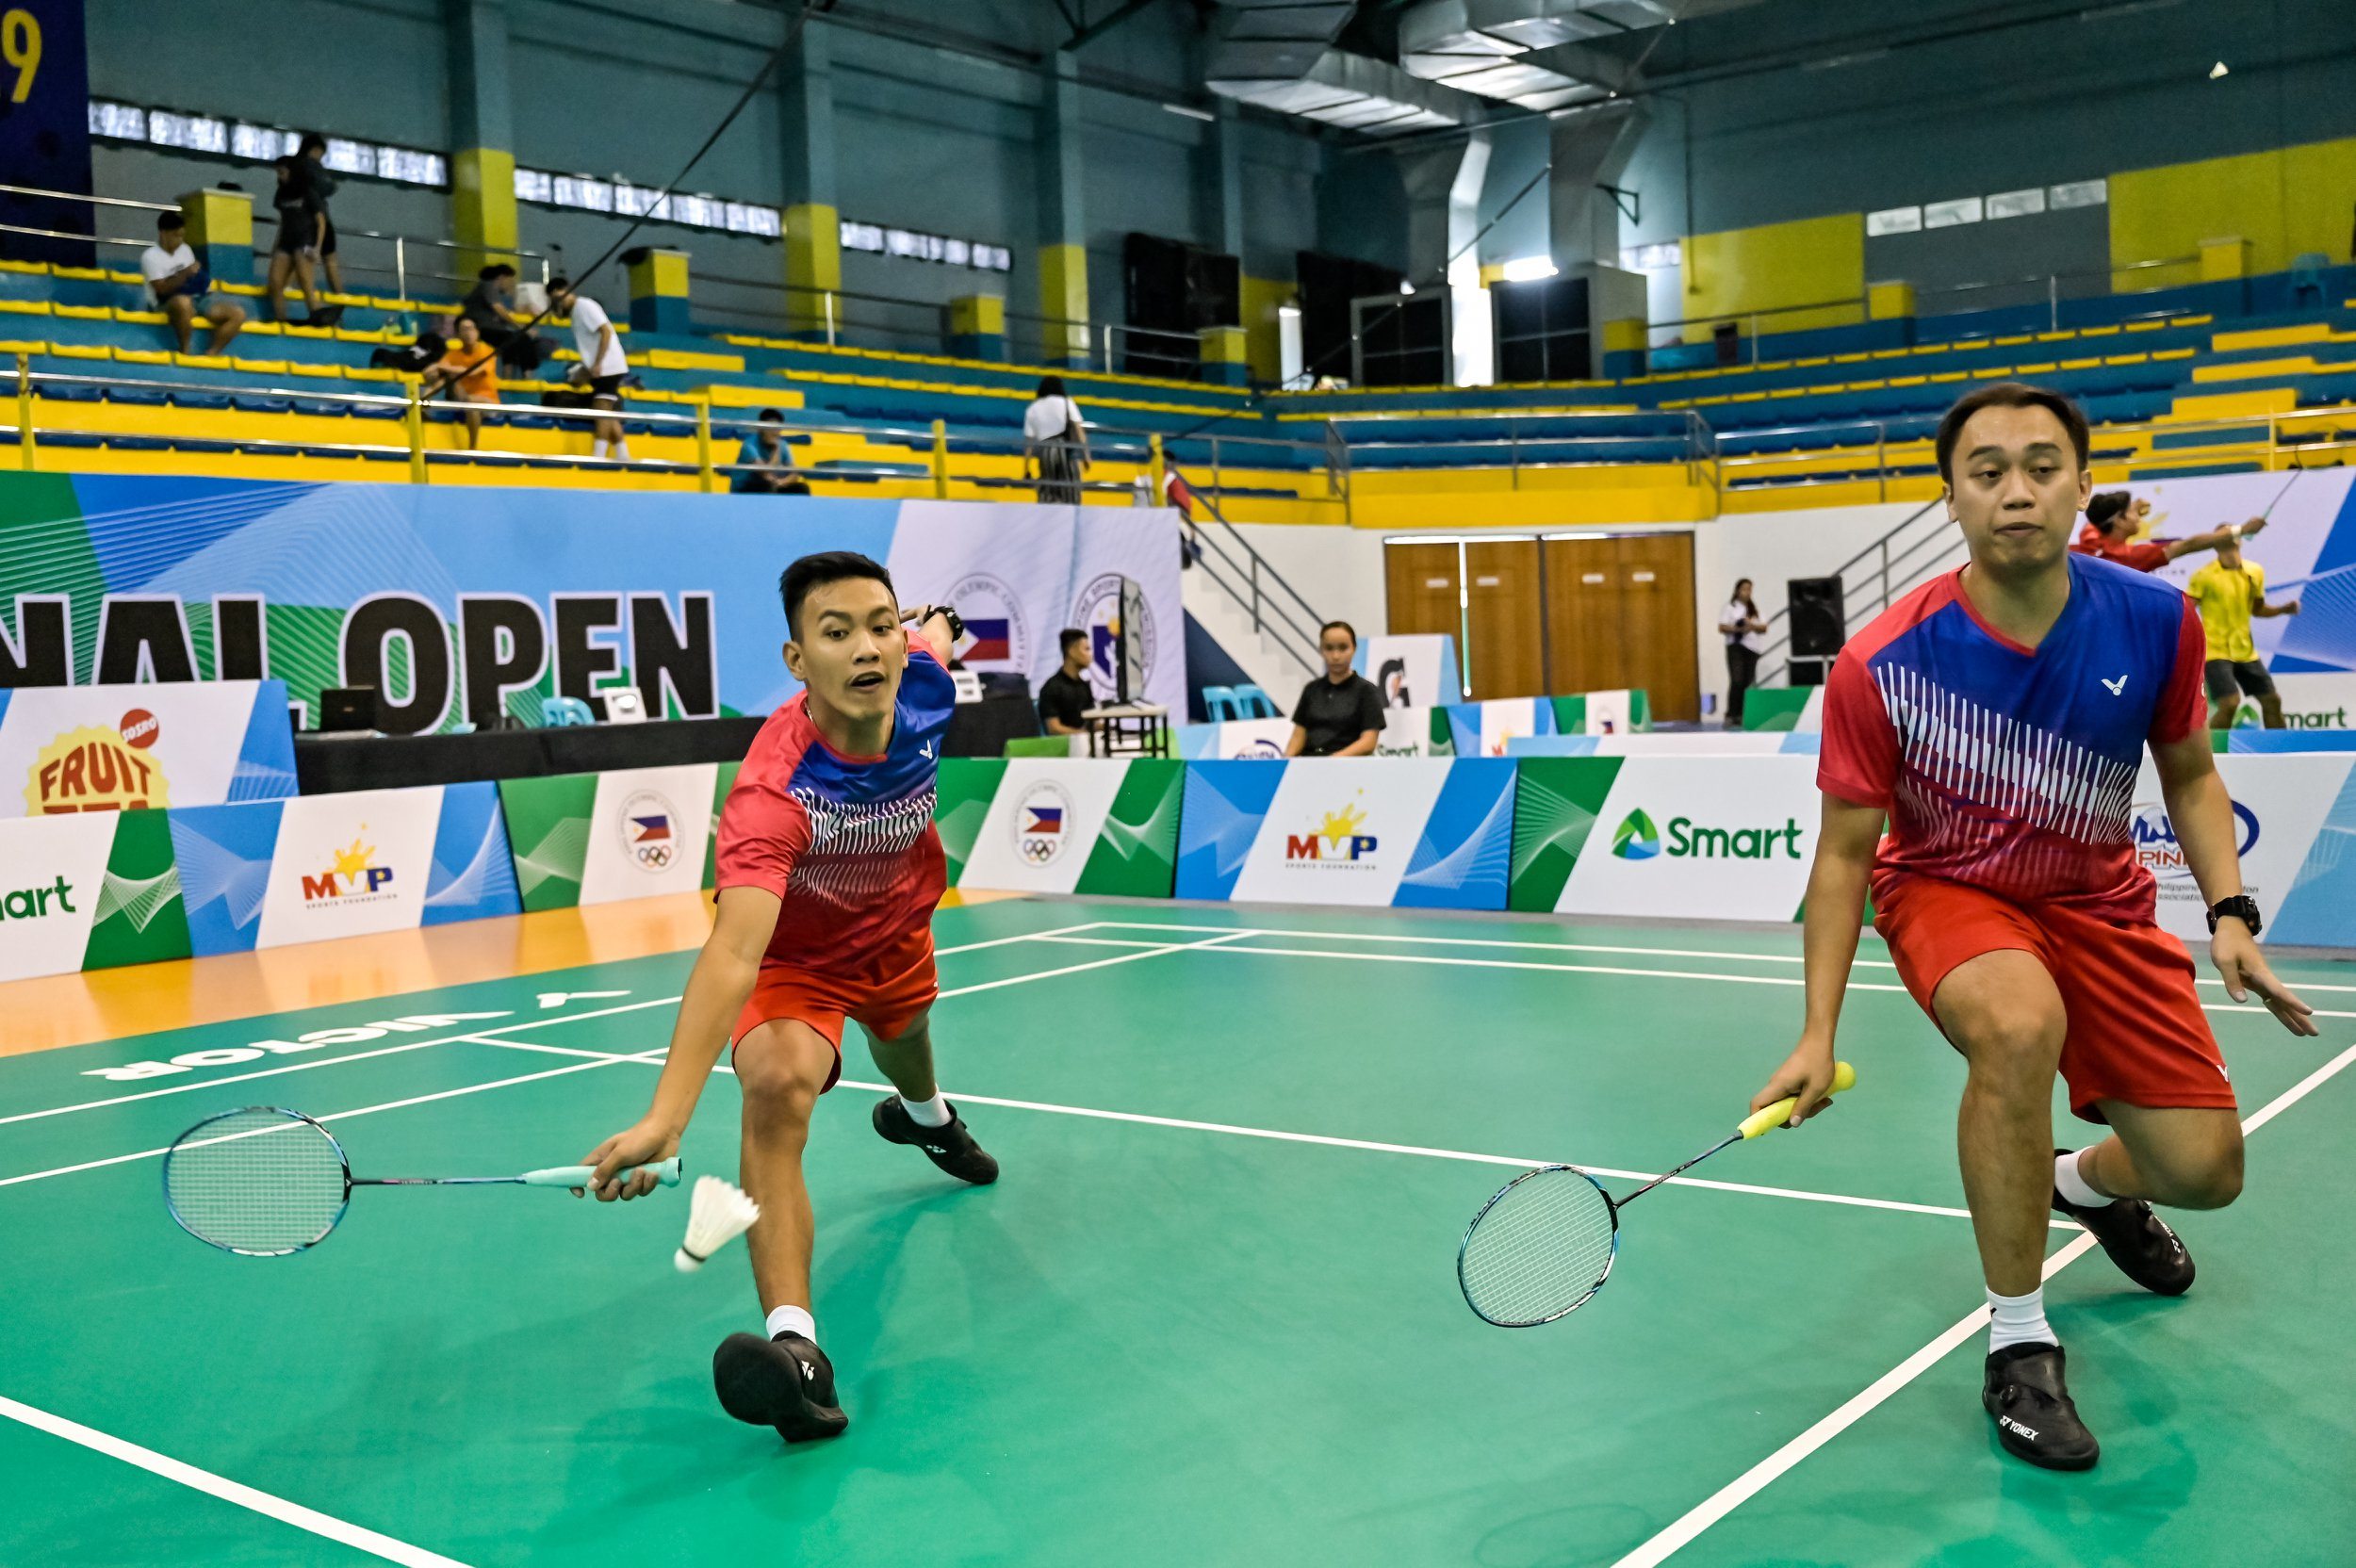 2019-SMART-Open-Alvin-Morada-and-Ariel-Magnaye Badminton players get chance to impress Smash head coach come MVP Cup 2021 SEA Games Badminton News  - philippine sports news